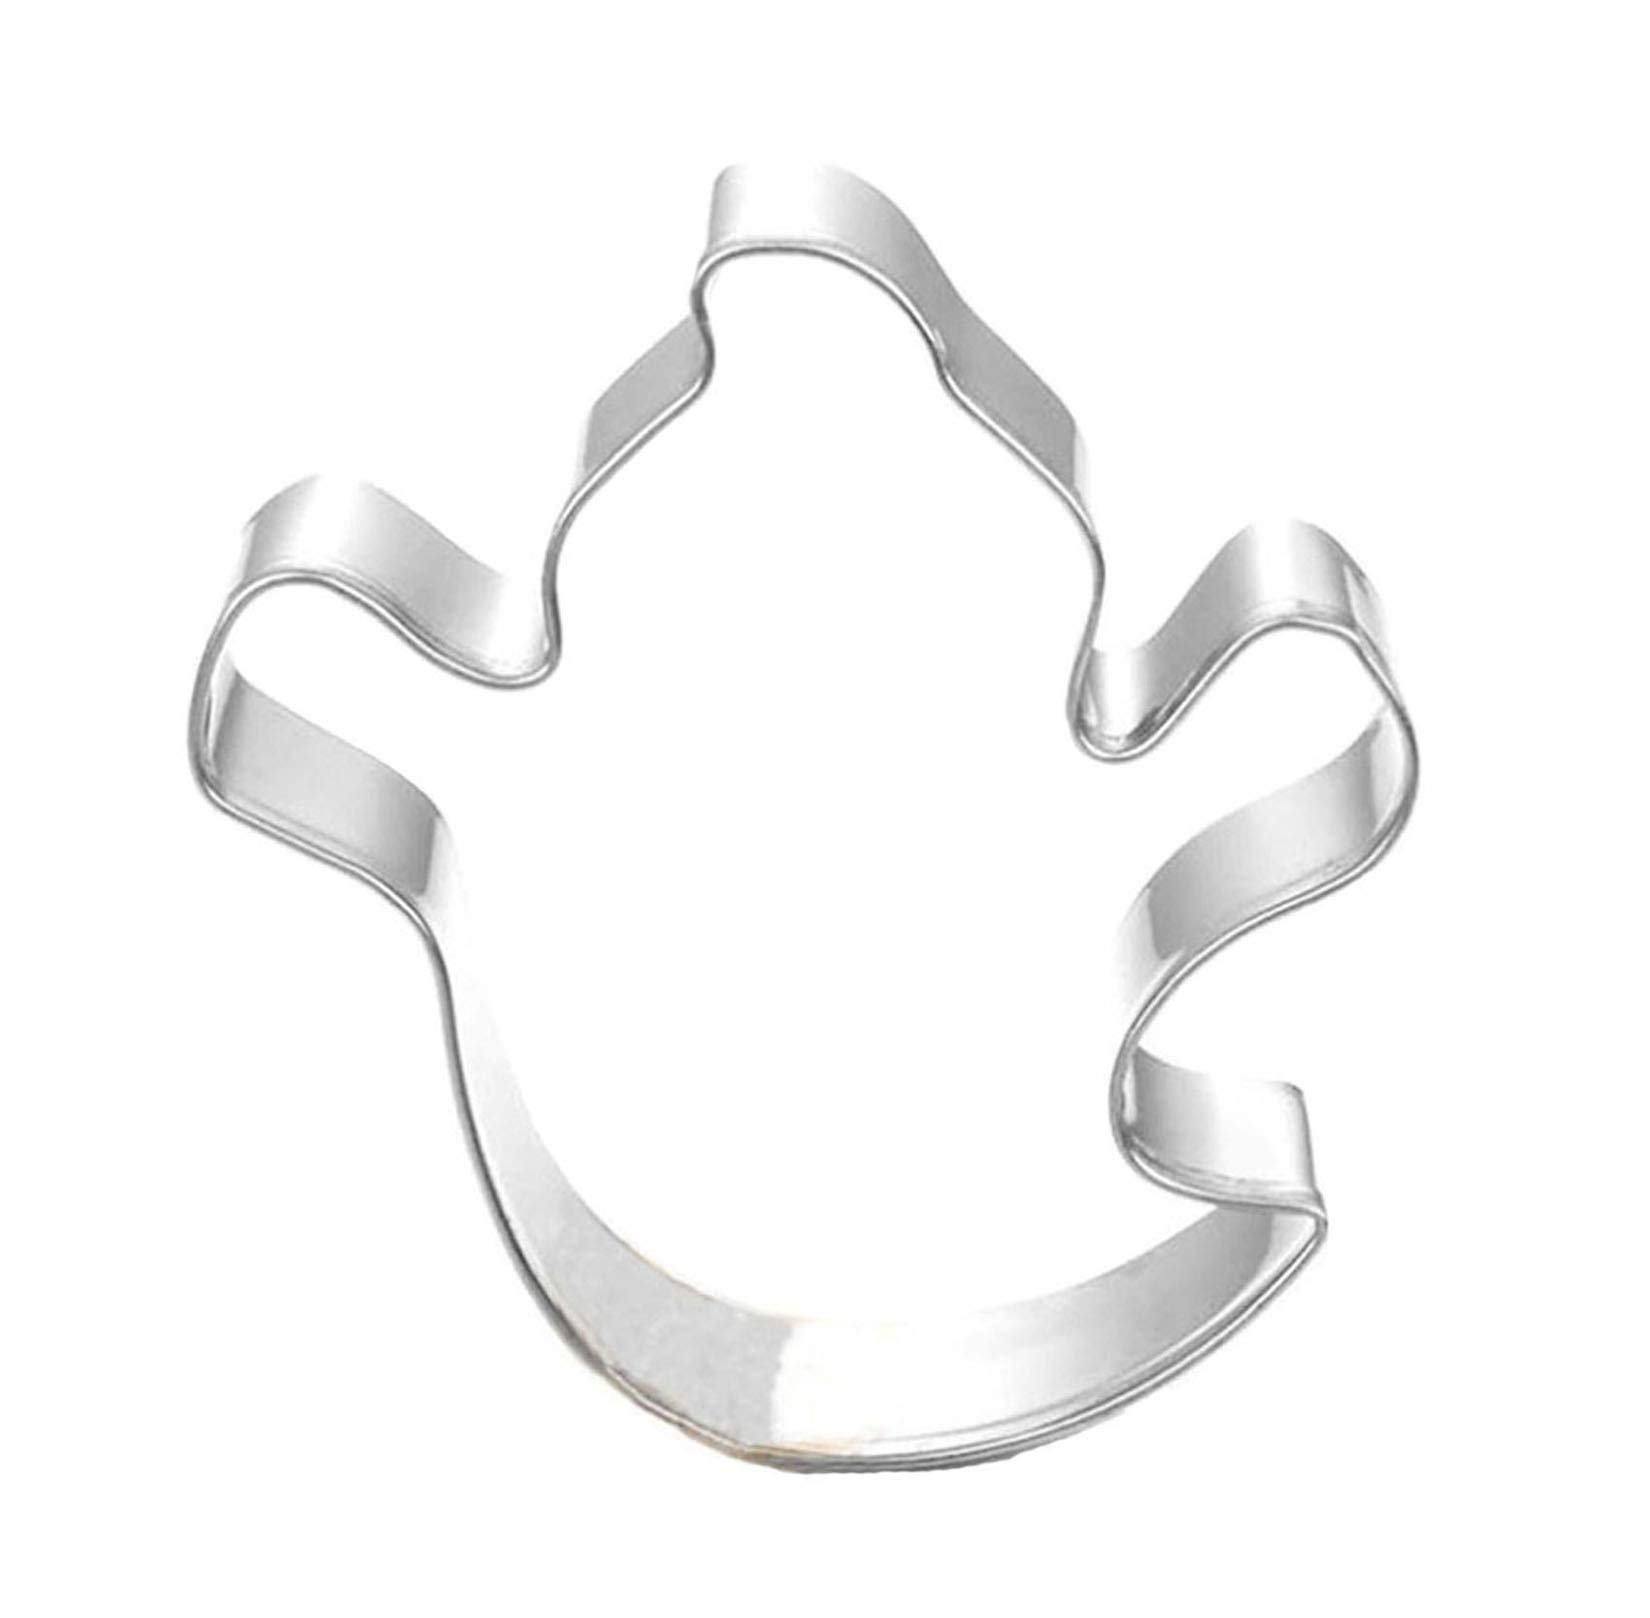 WJSYSHOP Mini Halloween Ghost Cookie Cutter Stainless Steel